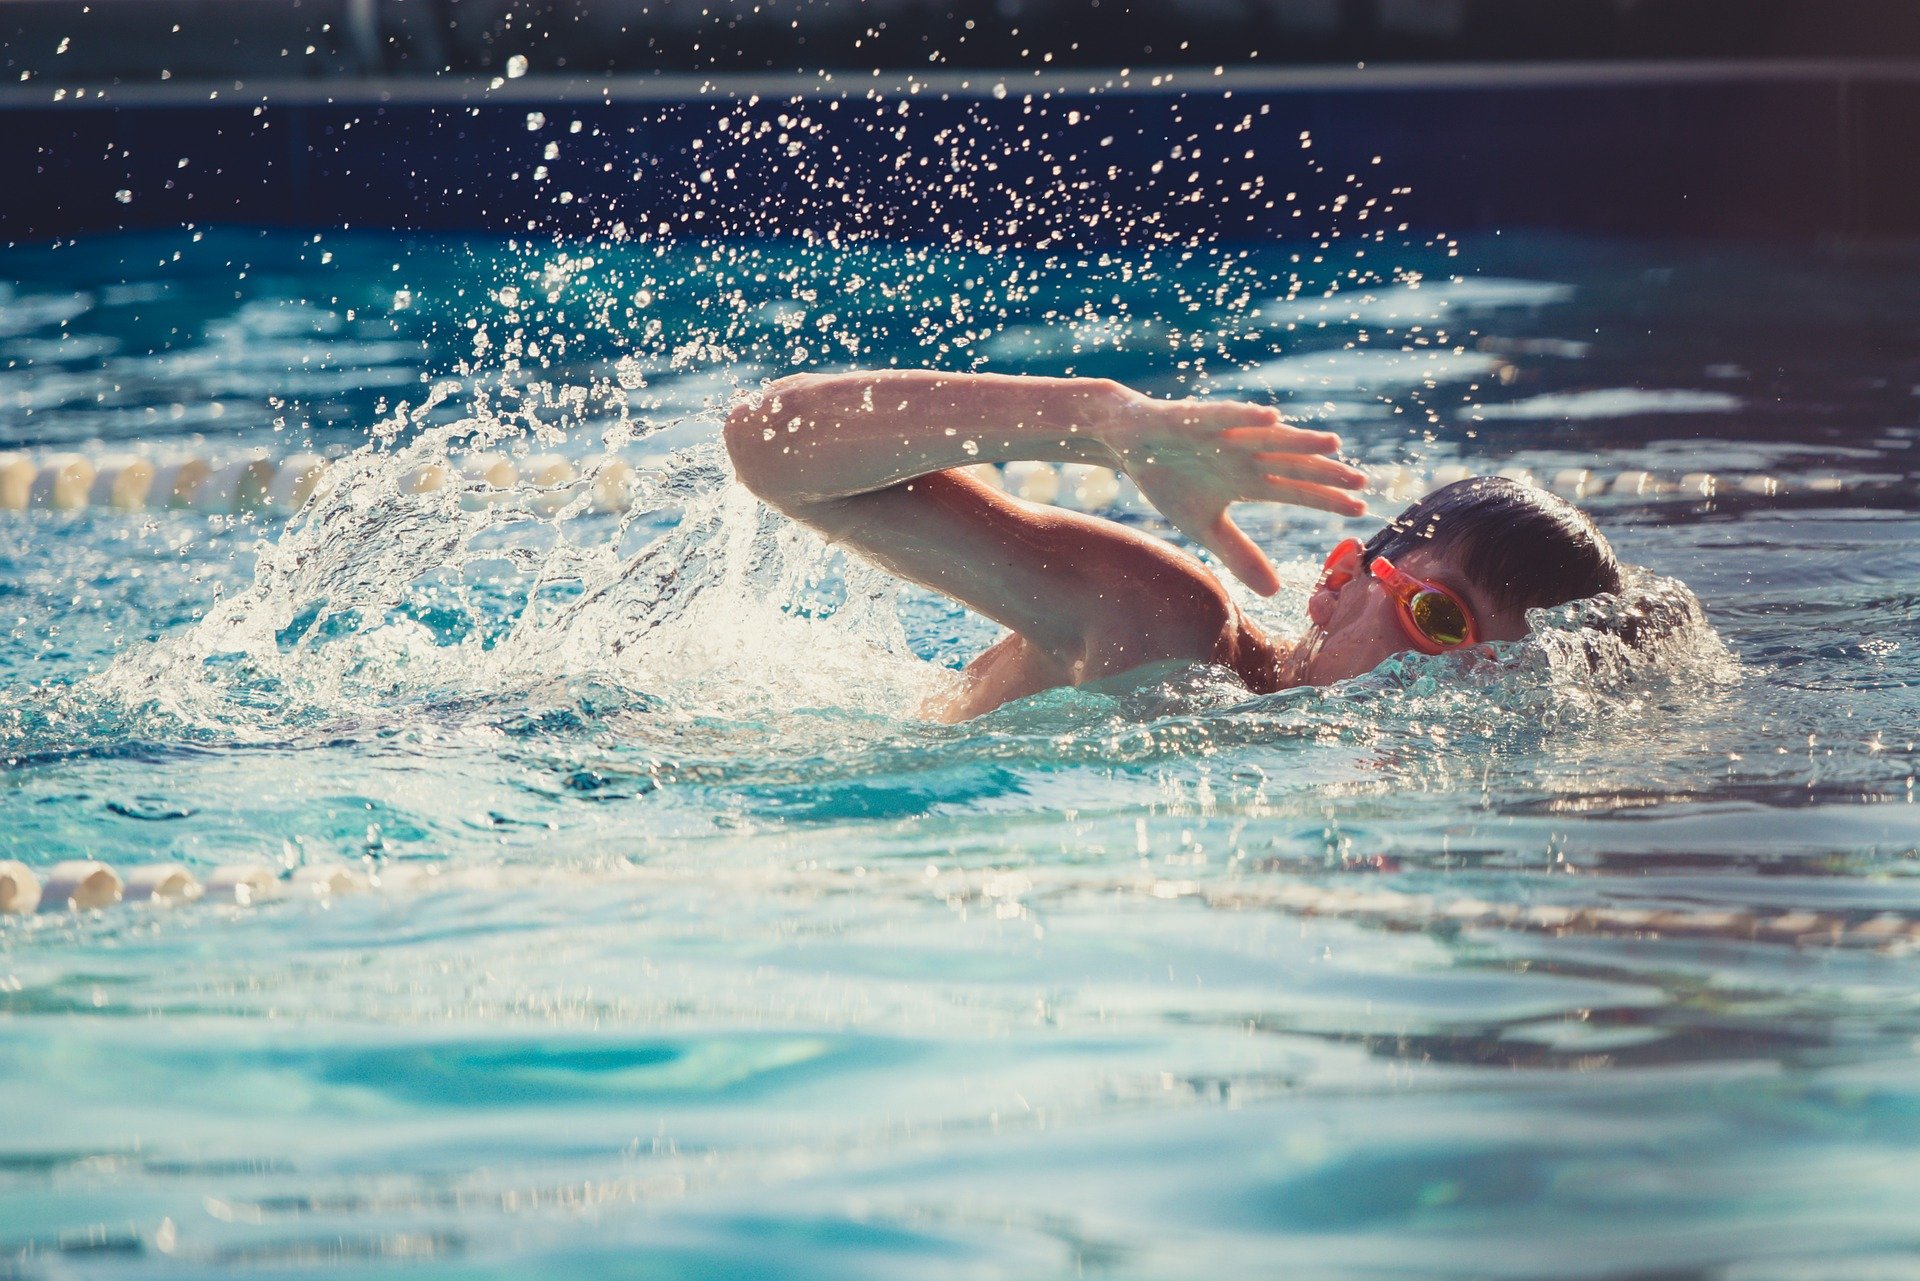 children's accidents in swimming pools